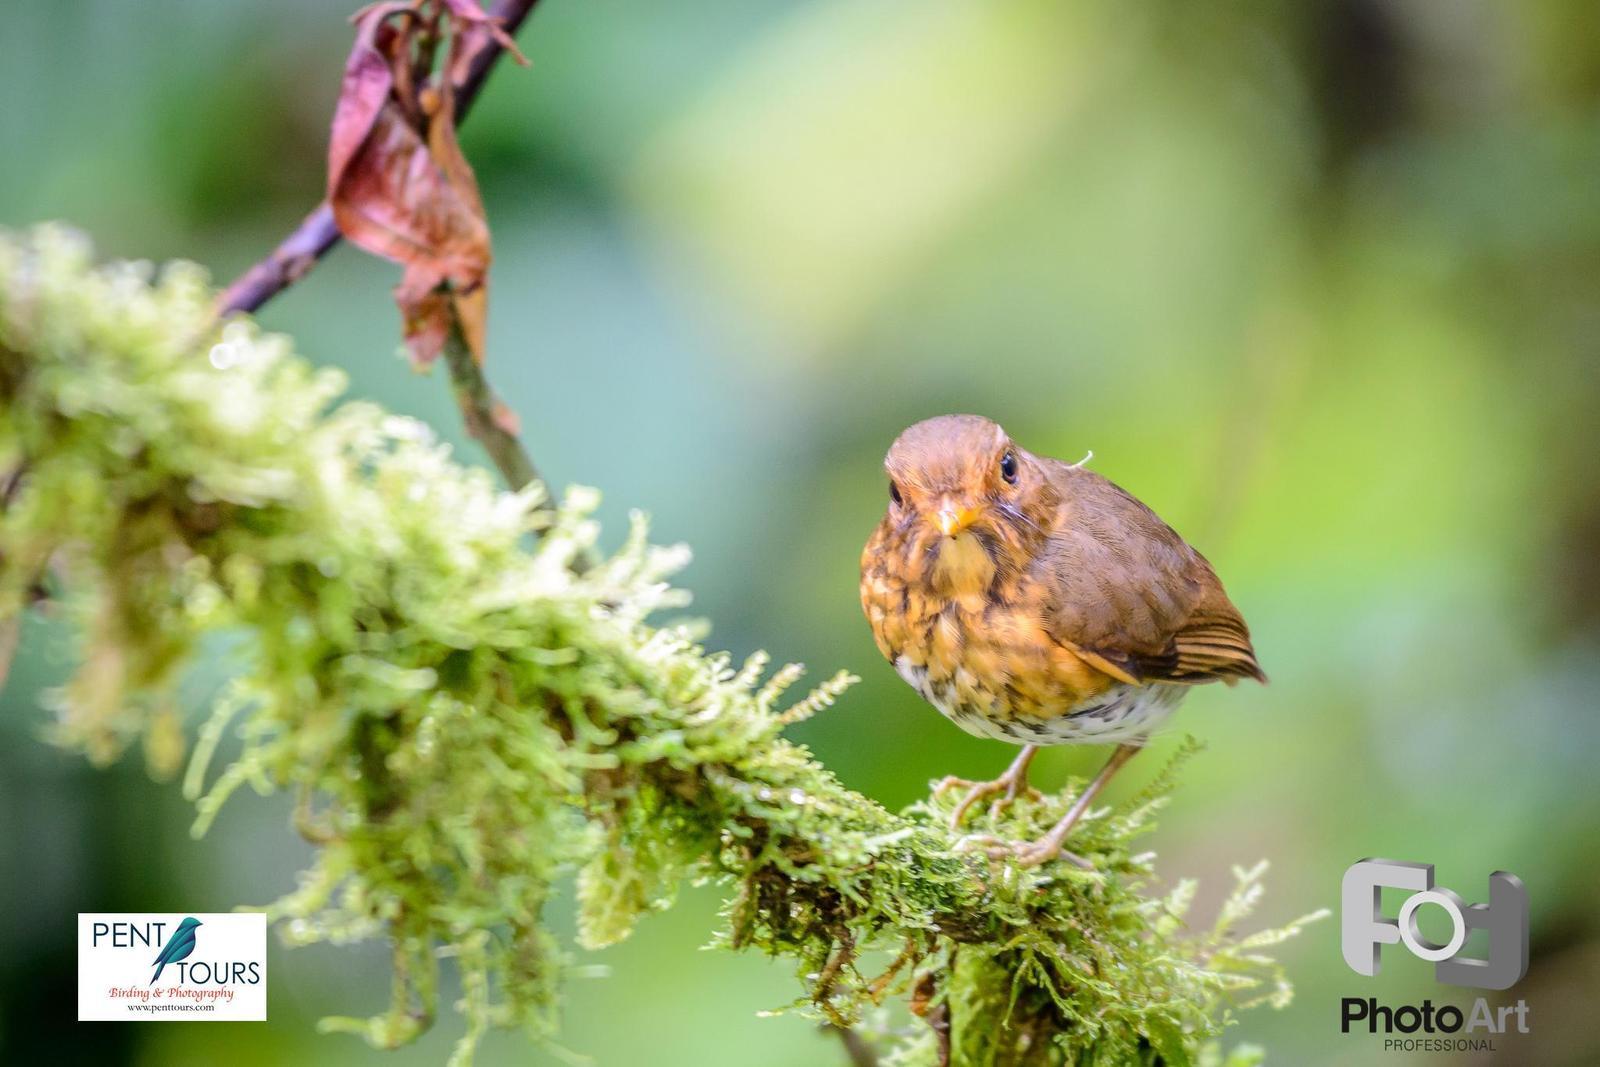 Ochre-breasted Antpitta Photo by pancho enriquez